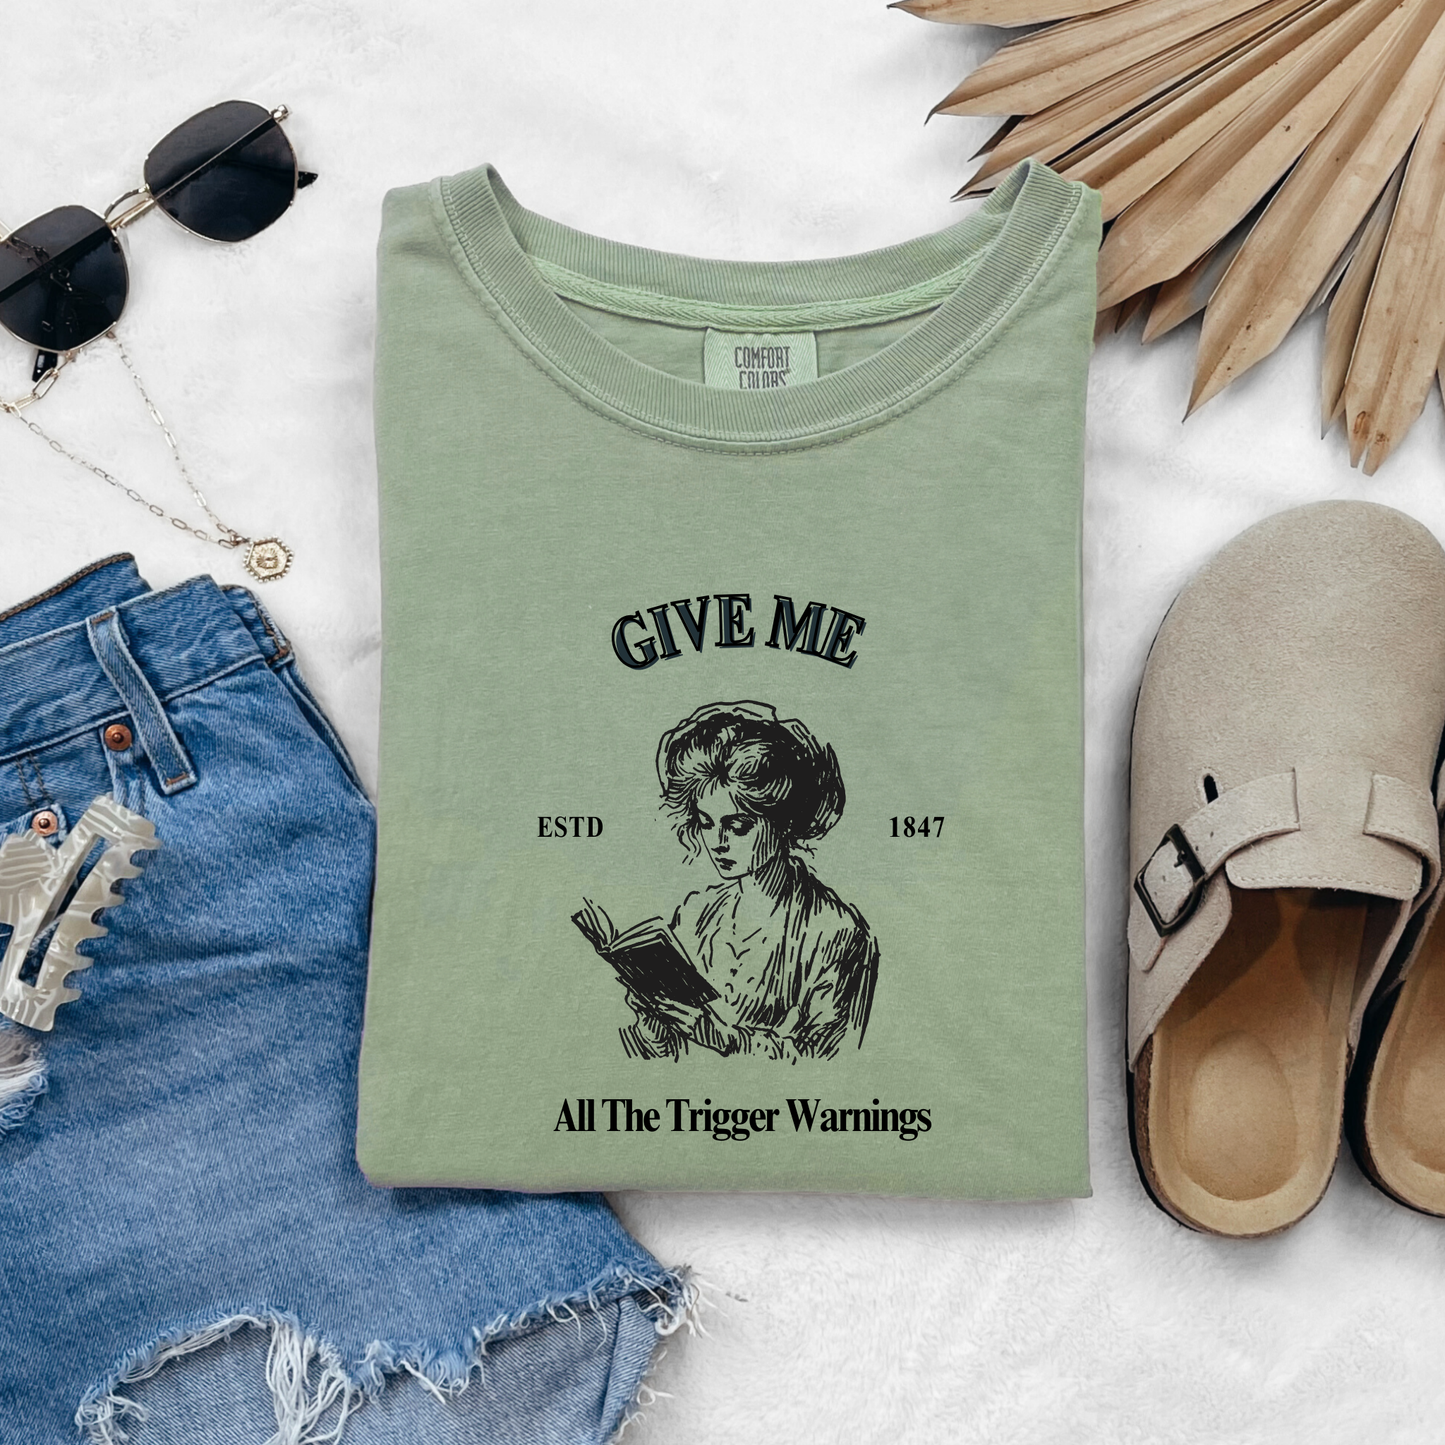 Give Me All The Trigger Warnings T-shirt